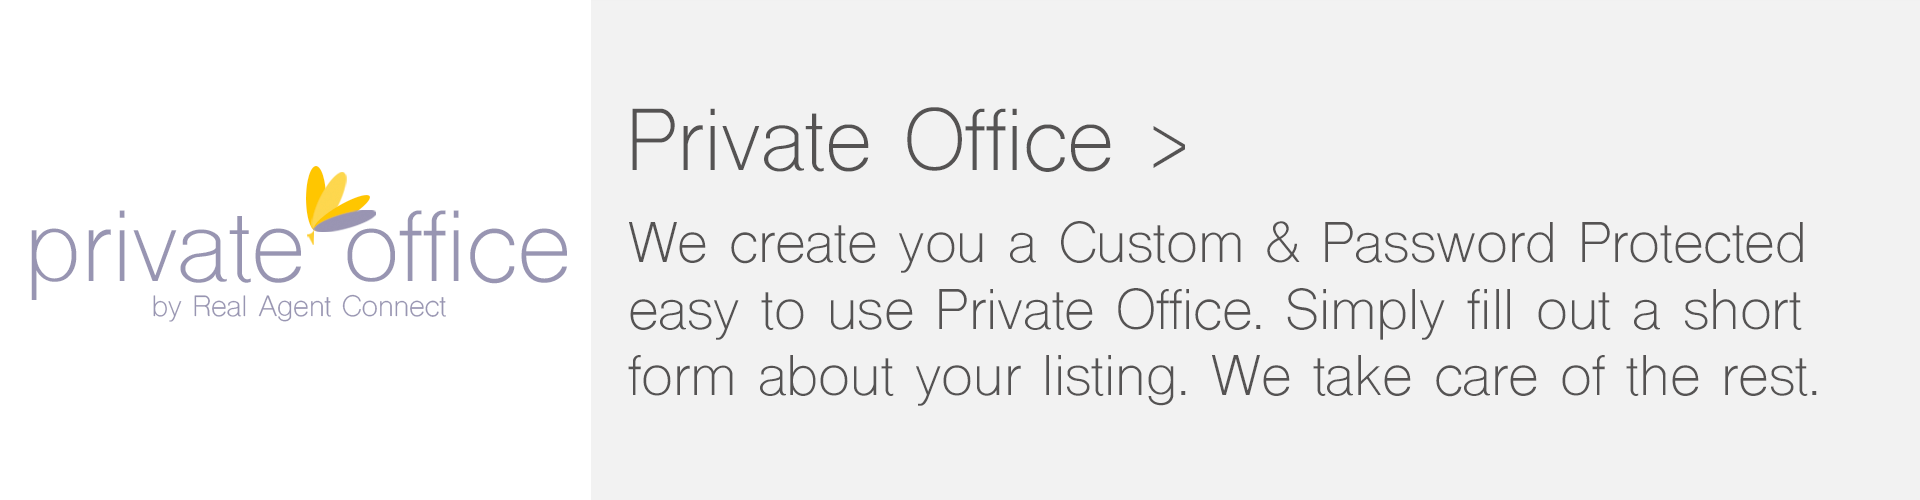 private-office-long